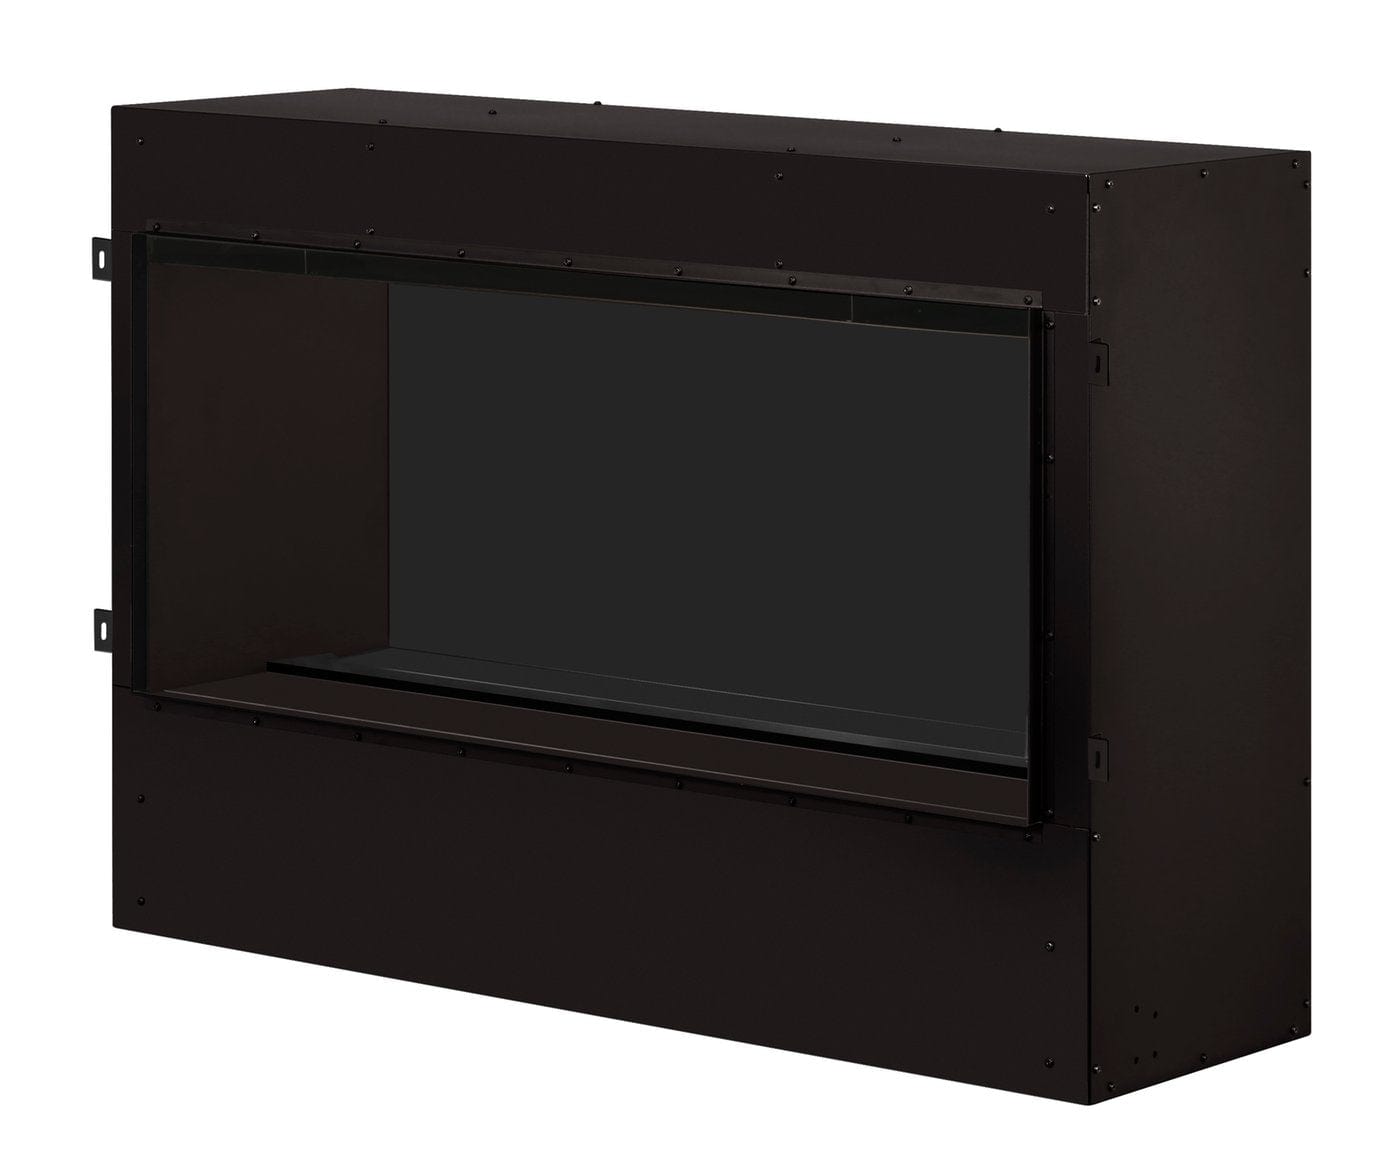 StarWood Fireplaces - Dimplex 40 Professional Built-In Box With Heat For CDFI1000-Pro -